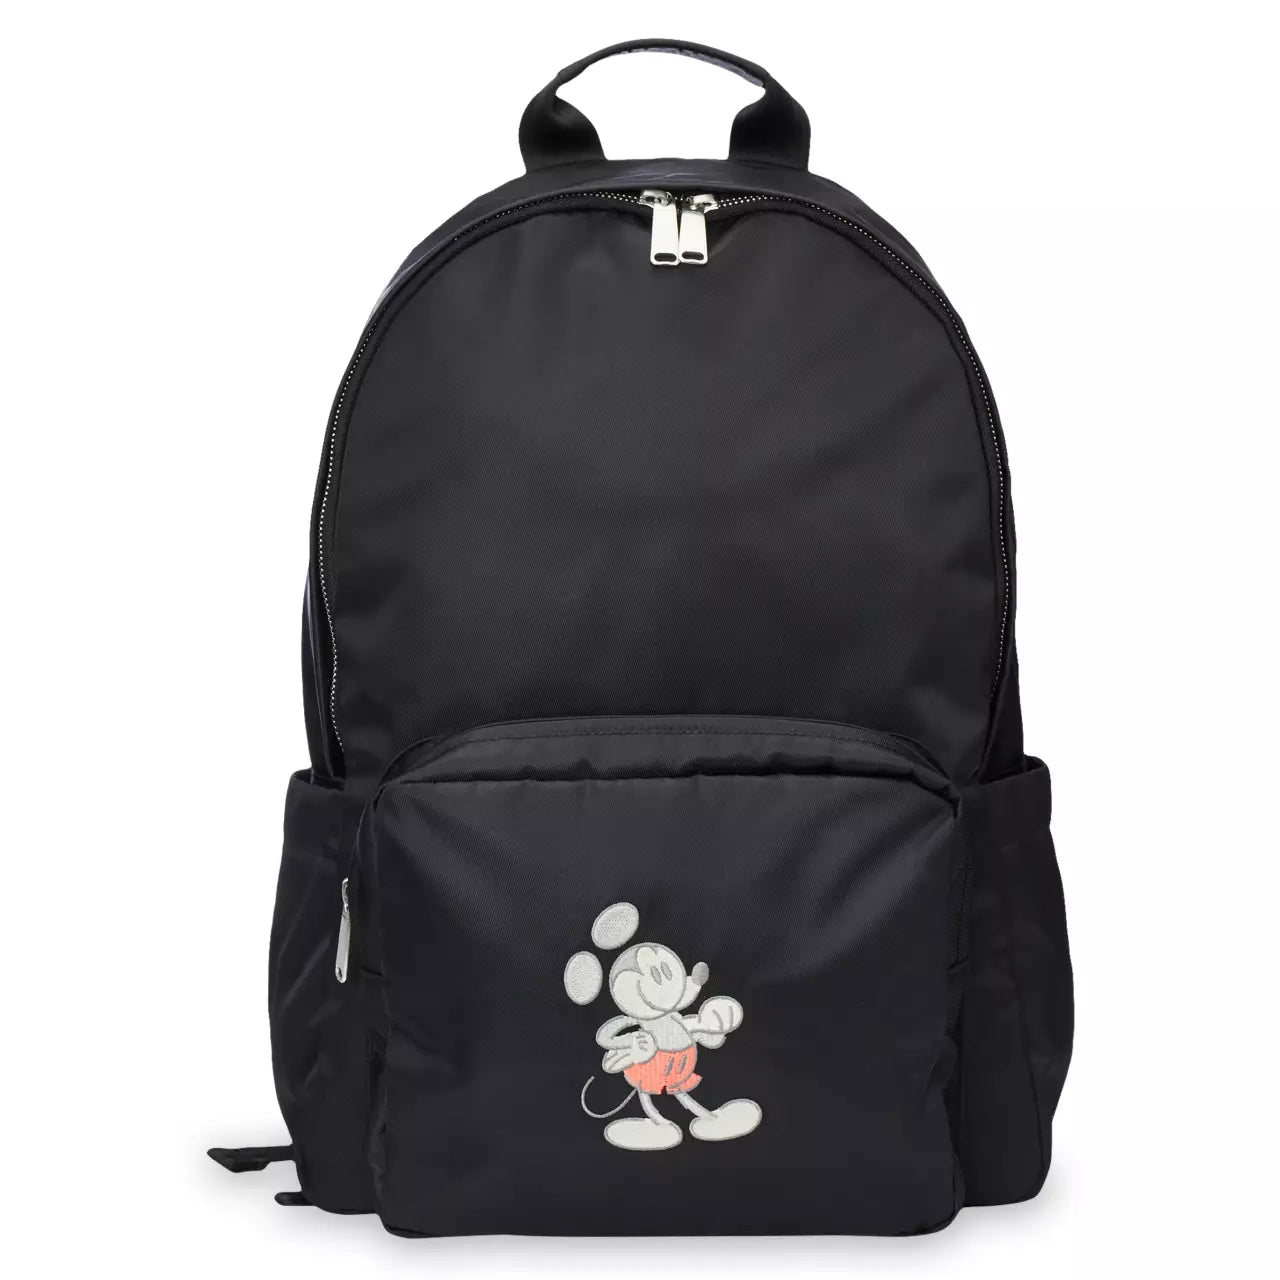 Mickey Mouse Genuine Mousewear Embroidered Backpack - BumbleToys - 14 Years & Up, 5-7 Years, 8-13 Years, Backpack, Bags, Boys, Characters, Disney, Girls, Pre-Order, School Supplies